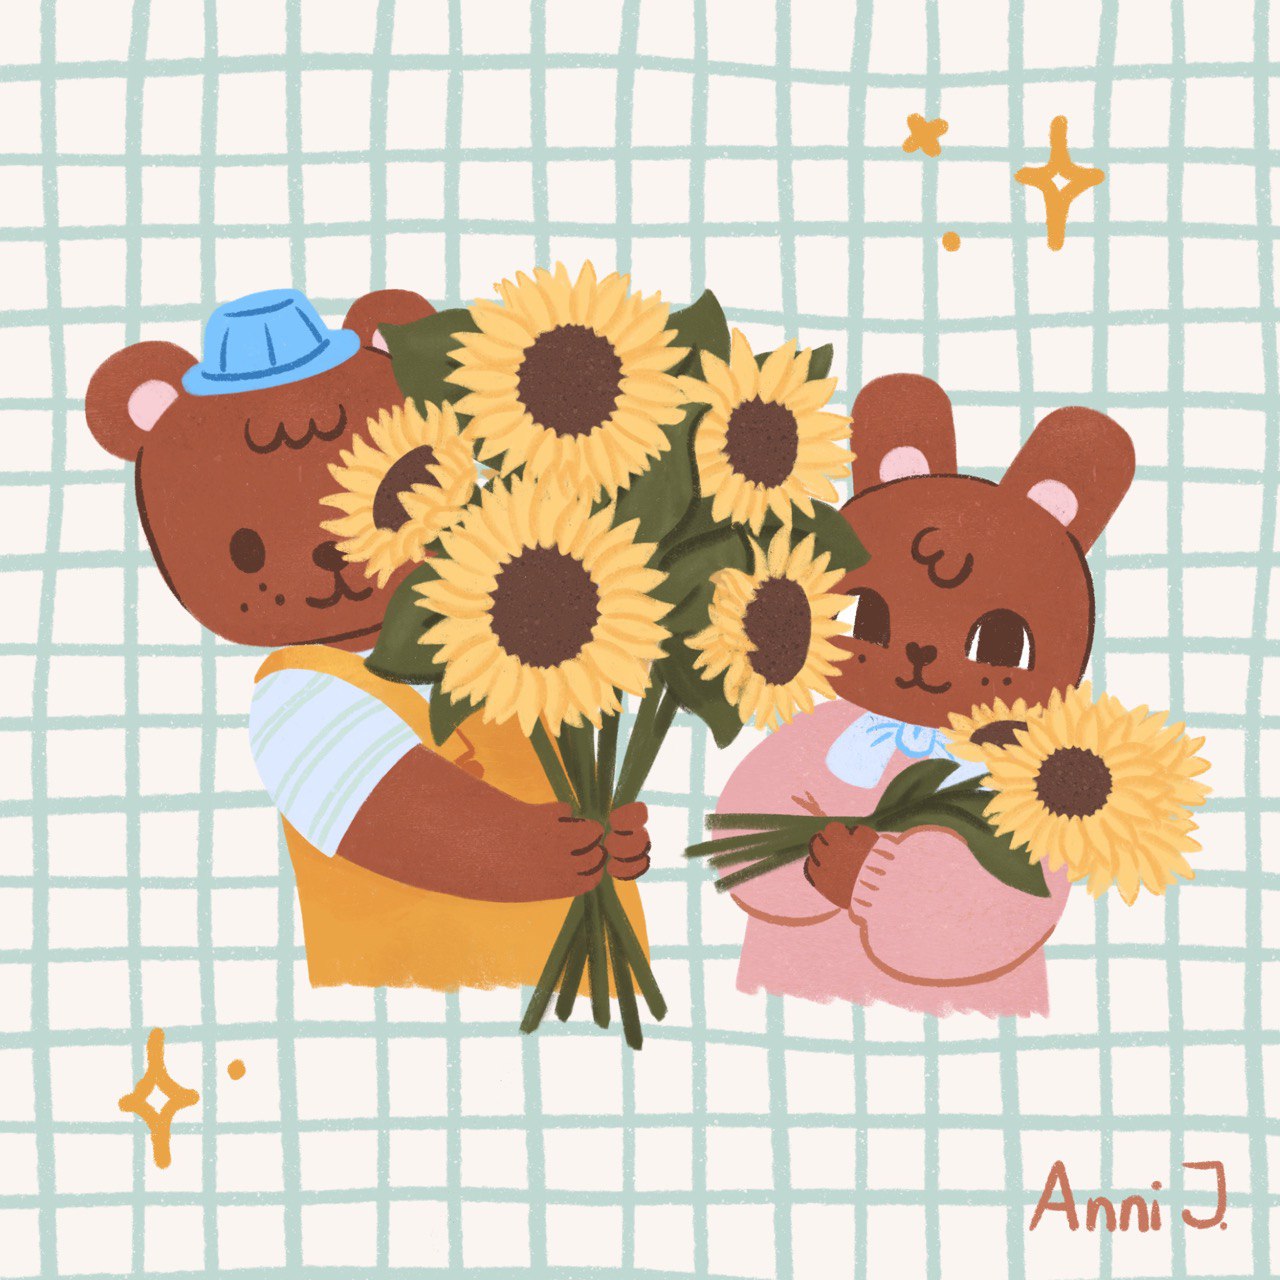 A cute children's book illustration in which you see a bouquet of yellow sunflowers held by a cute bear and an adorable bunny.